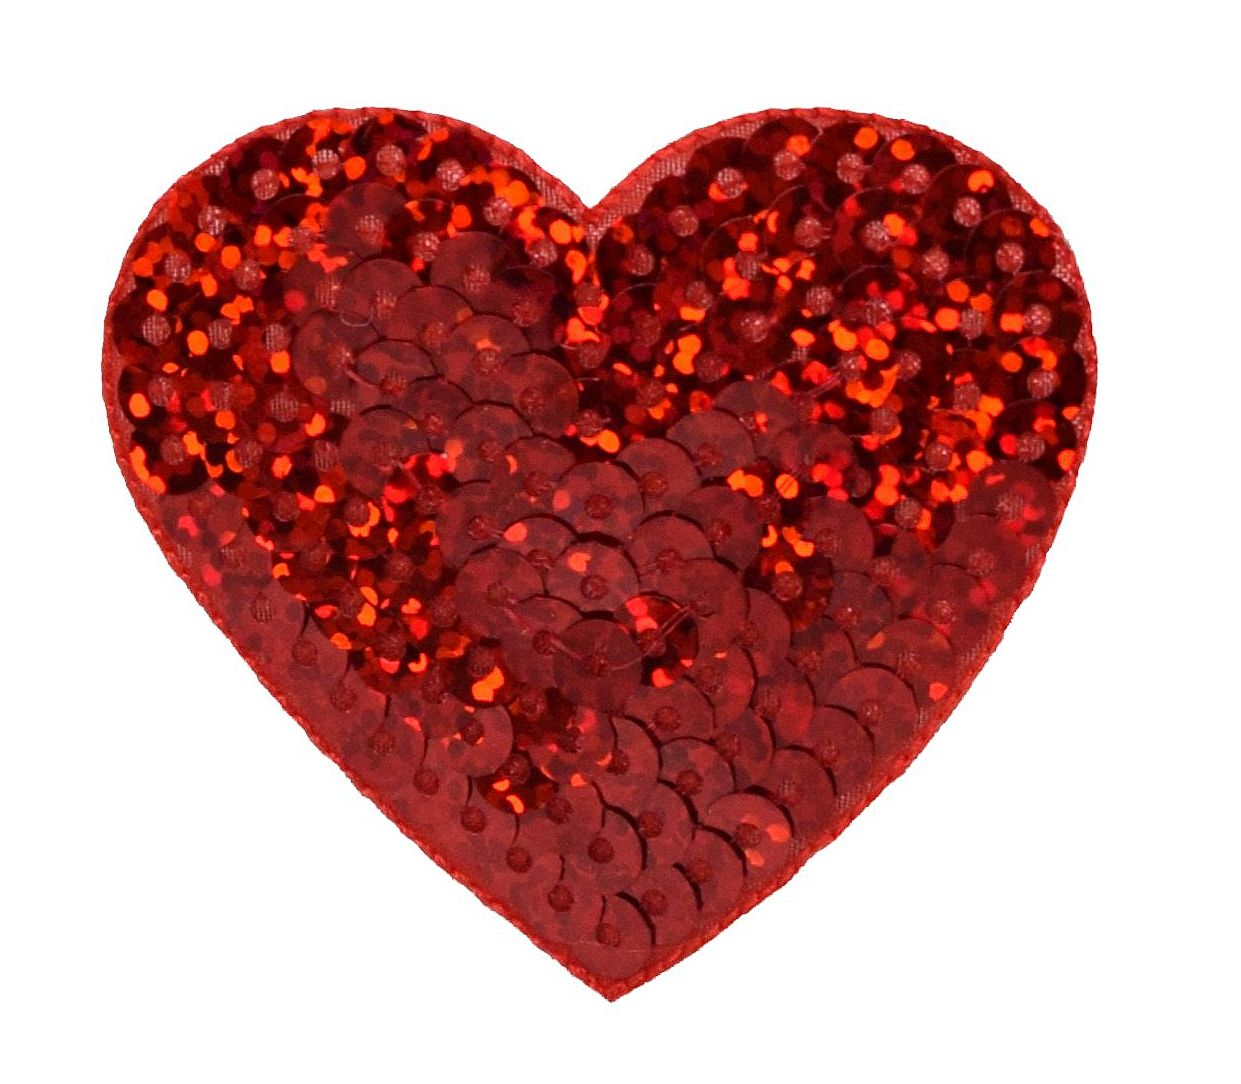 Valentine - Large - 2" Red Sequin Heart - Iron on Applique/Embroidered Patch - image 1 of 1